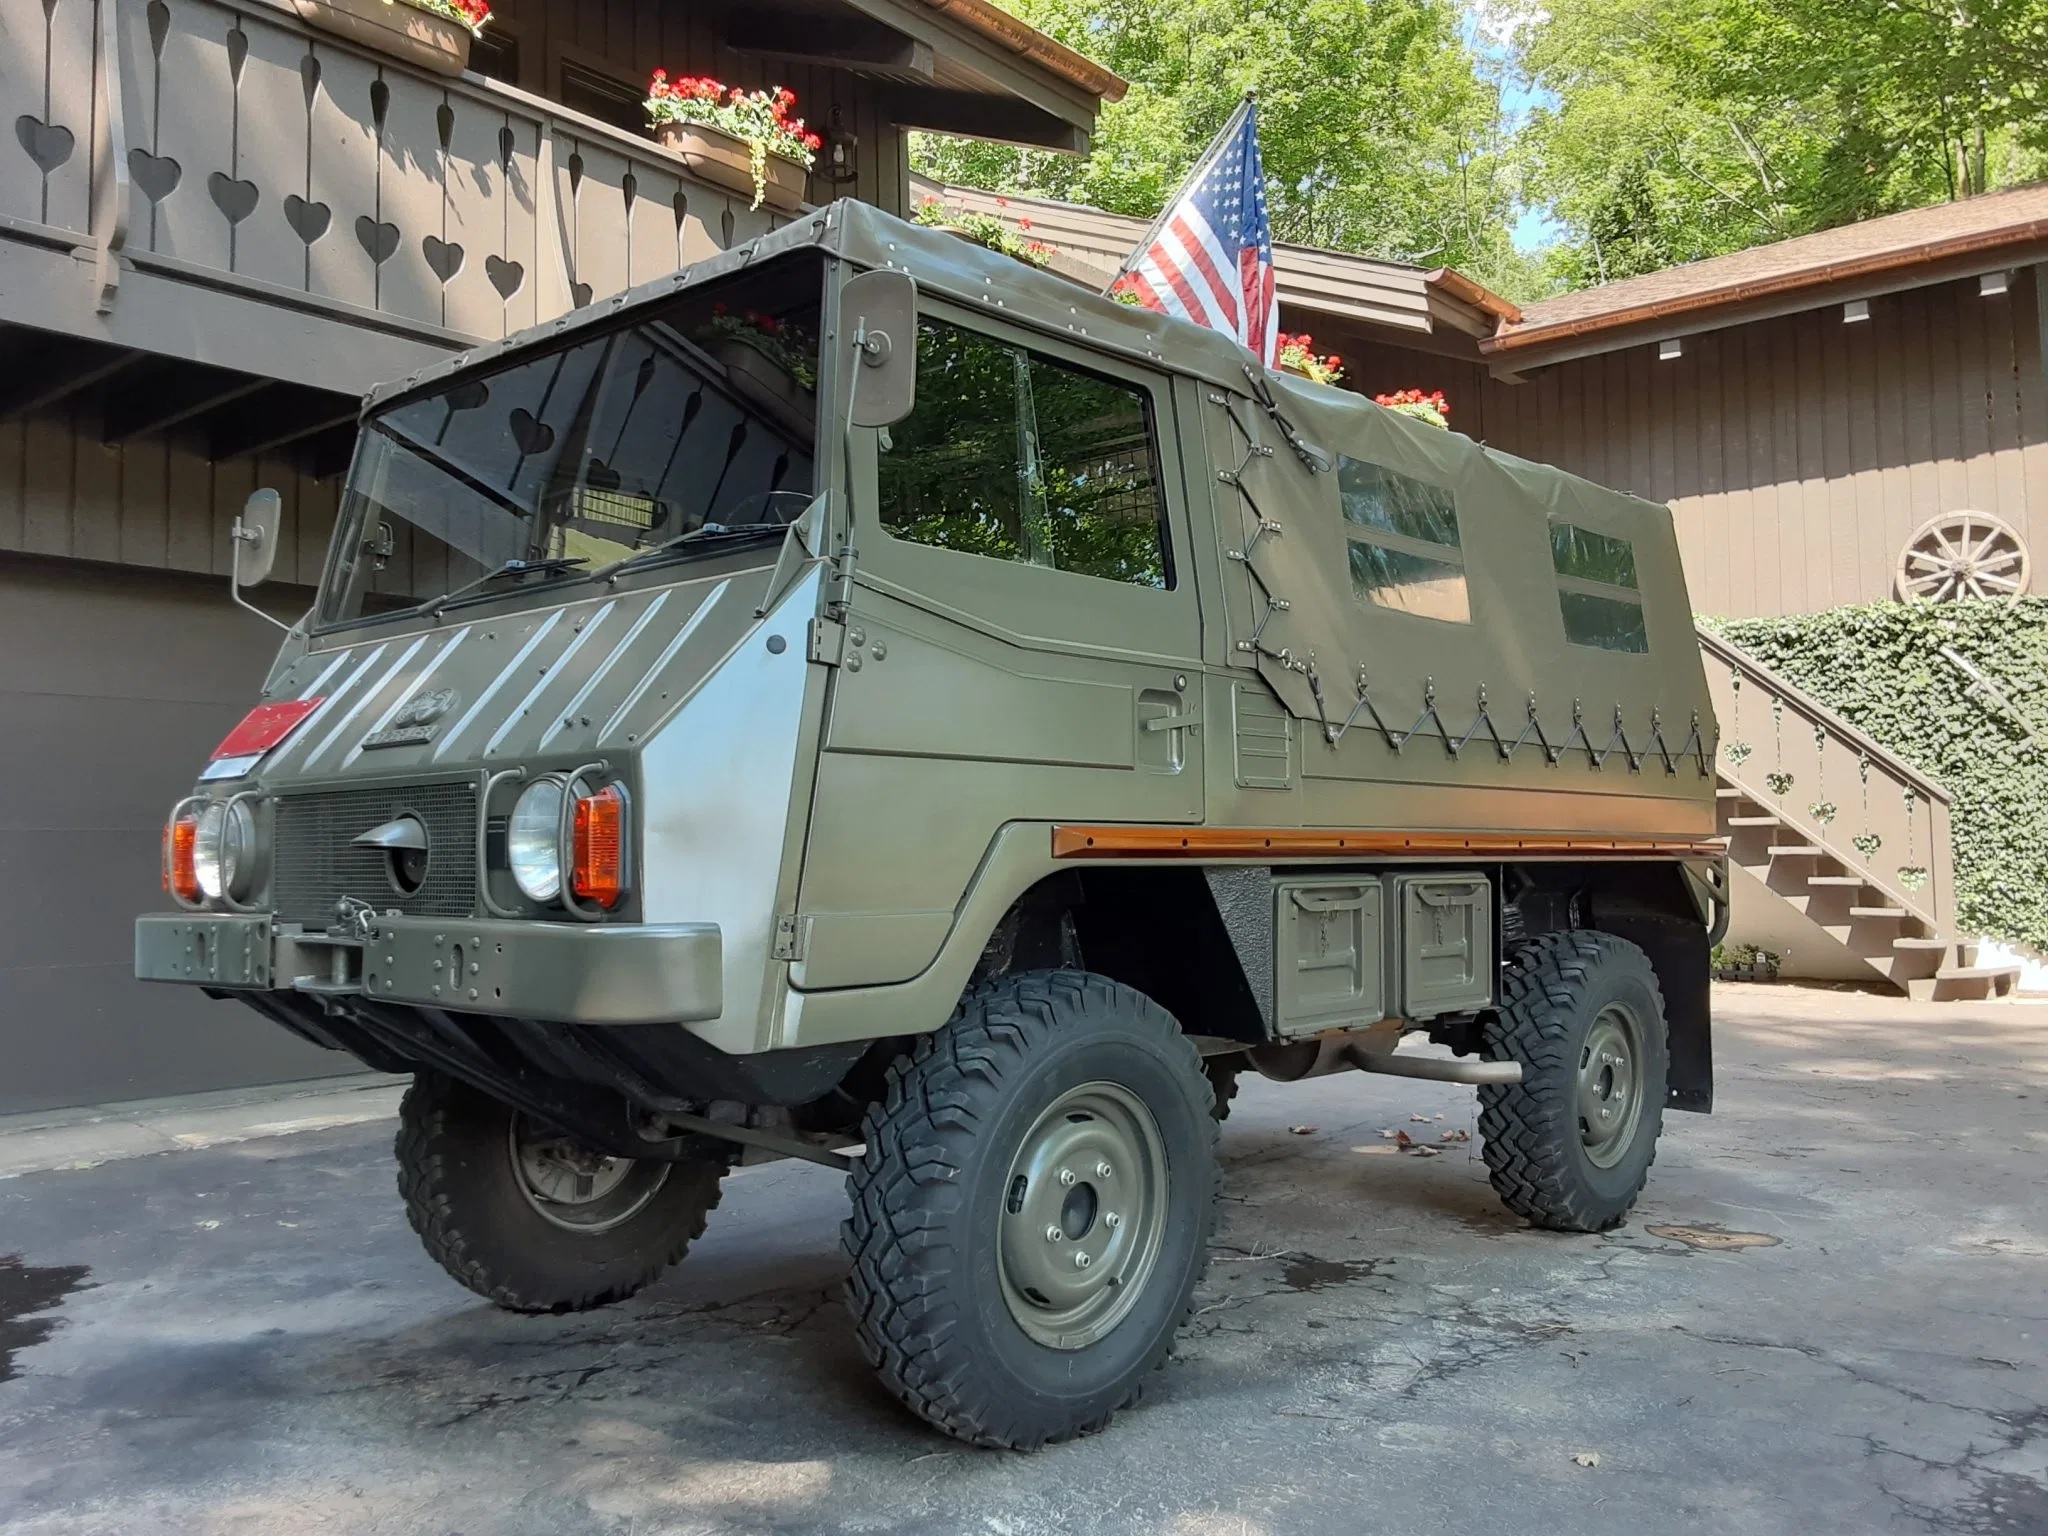 Bob Lutz's olive-green 1973 Steyr-Puch Pinzgauer 710M in front of a brown house